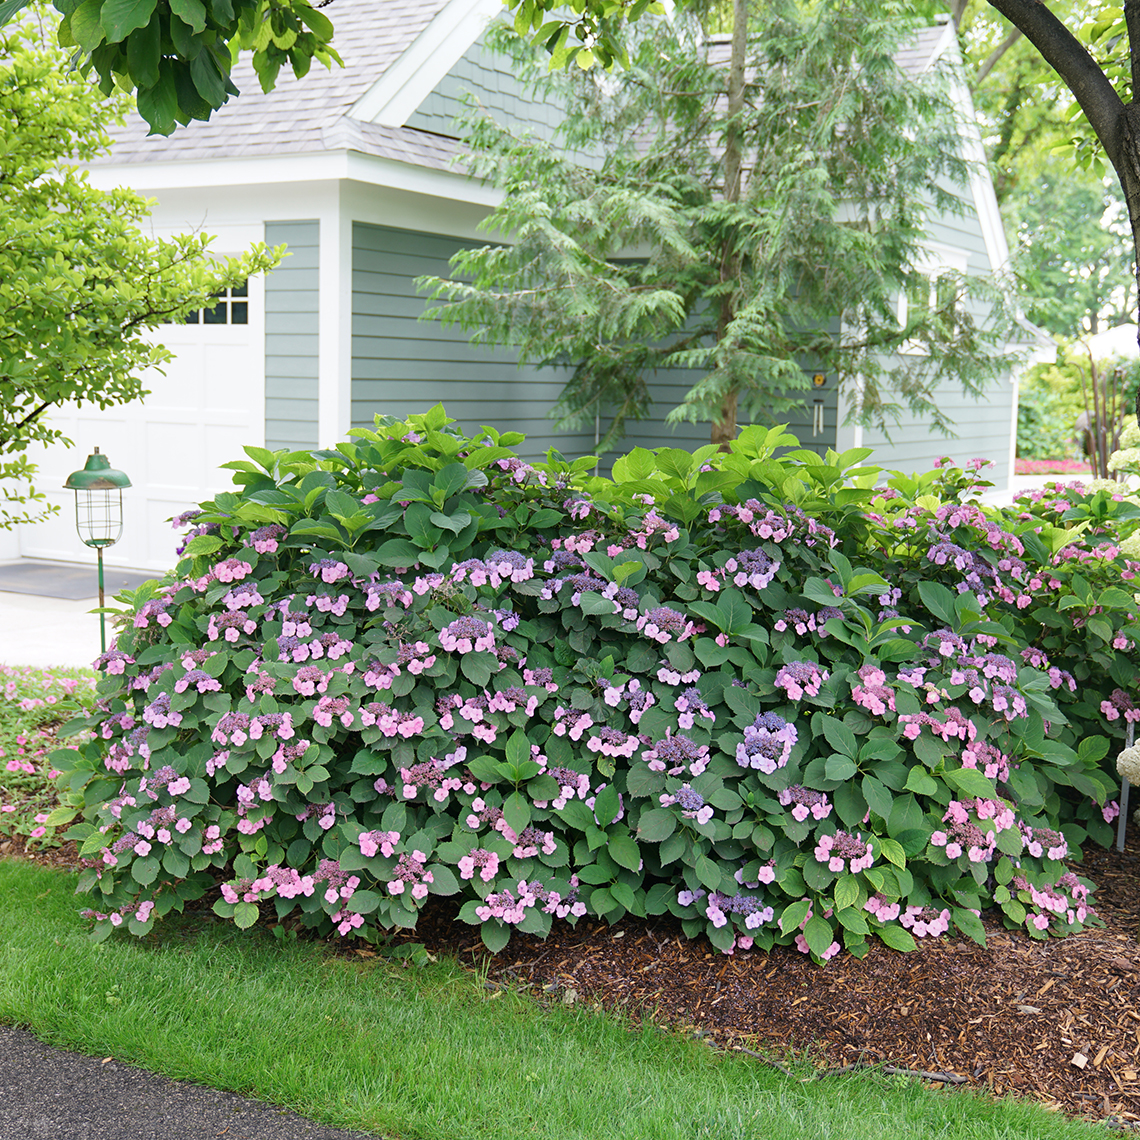 A rounded mature specimen of Tuff Stuff mountain hydrangea covered in pink and blue blooms in the landscape